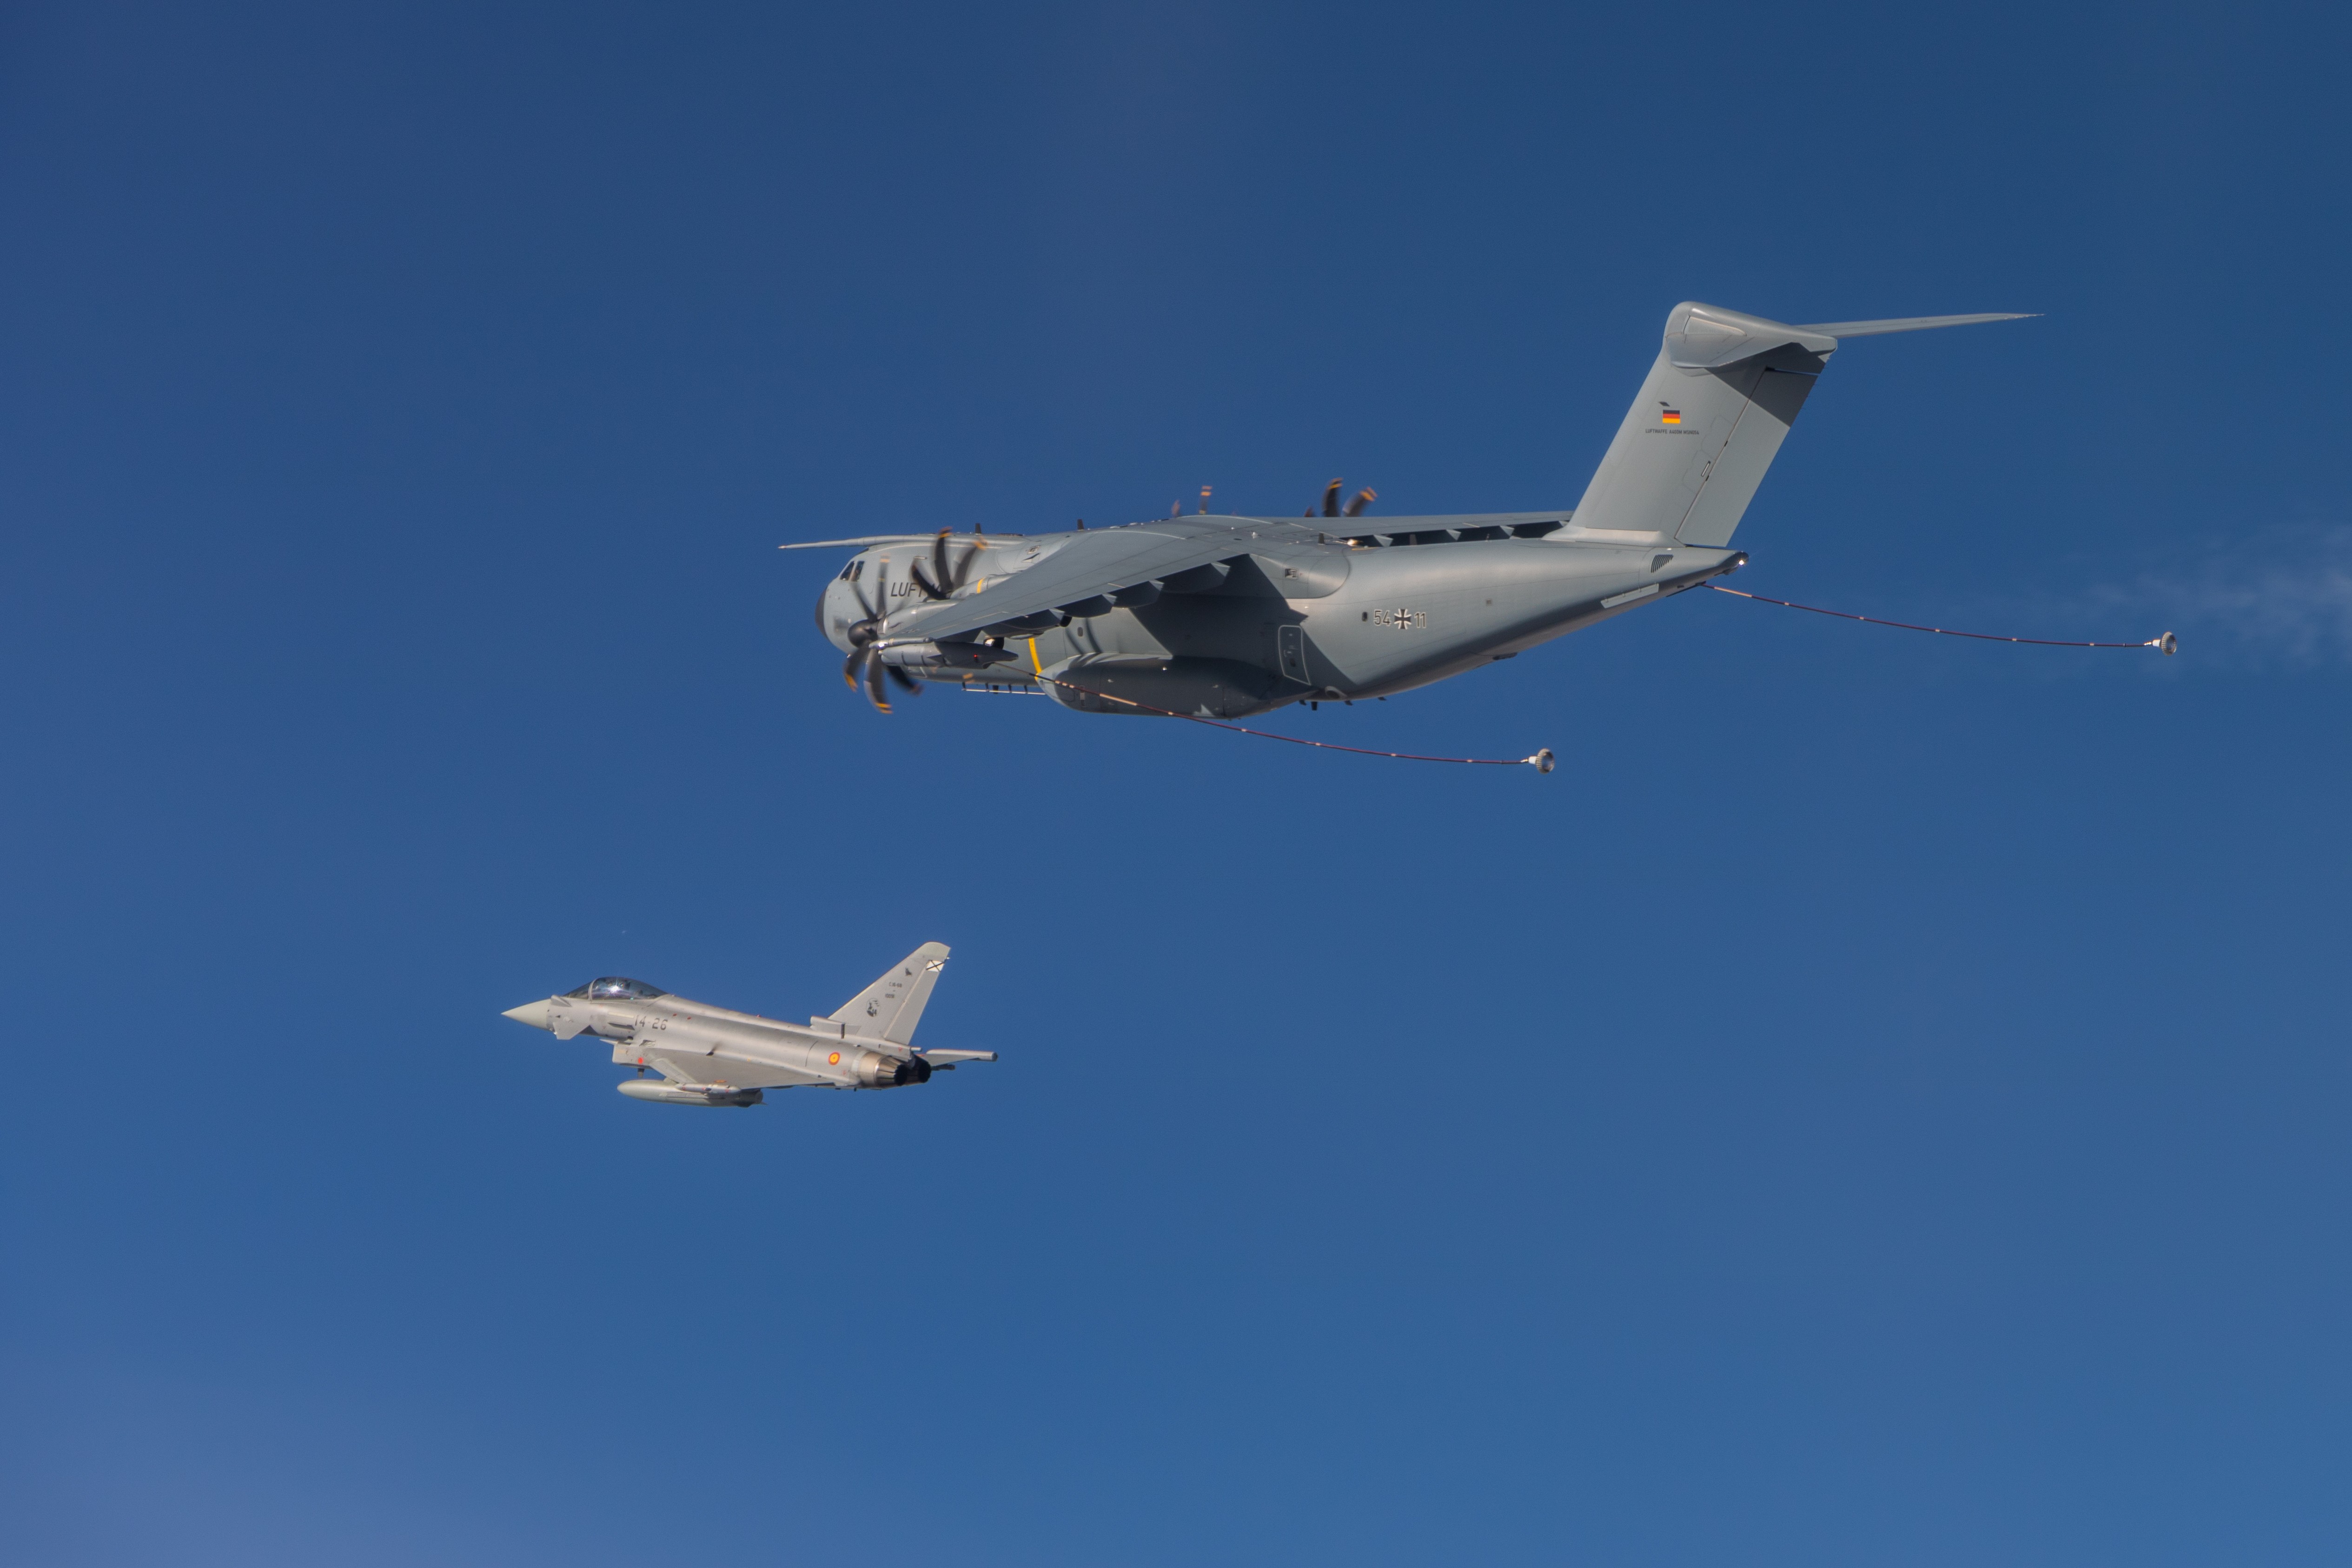 Don’t miss the exclusive photos of Spanish and German A400Ms air-to-air refuelling Eurofighters!